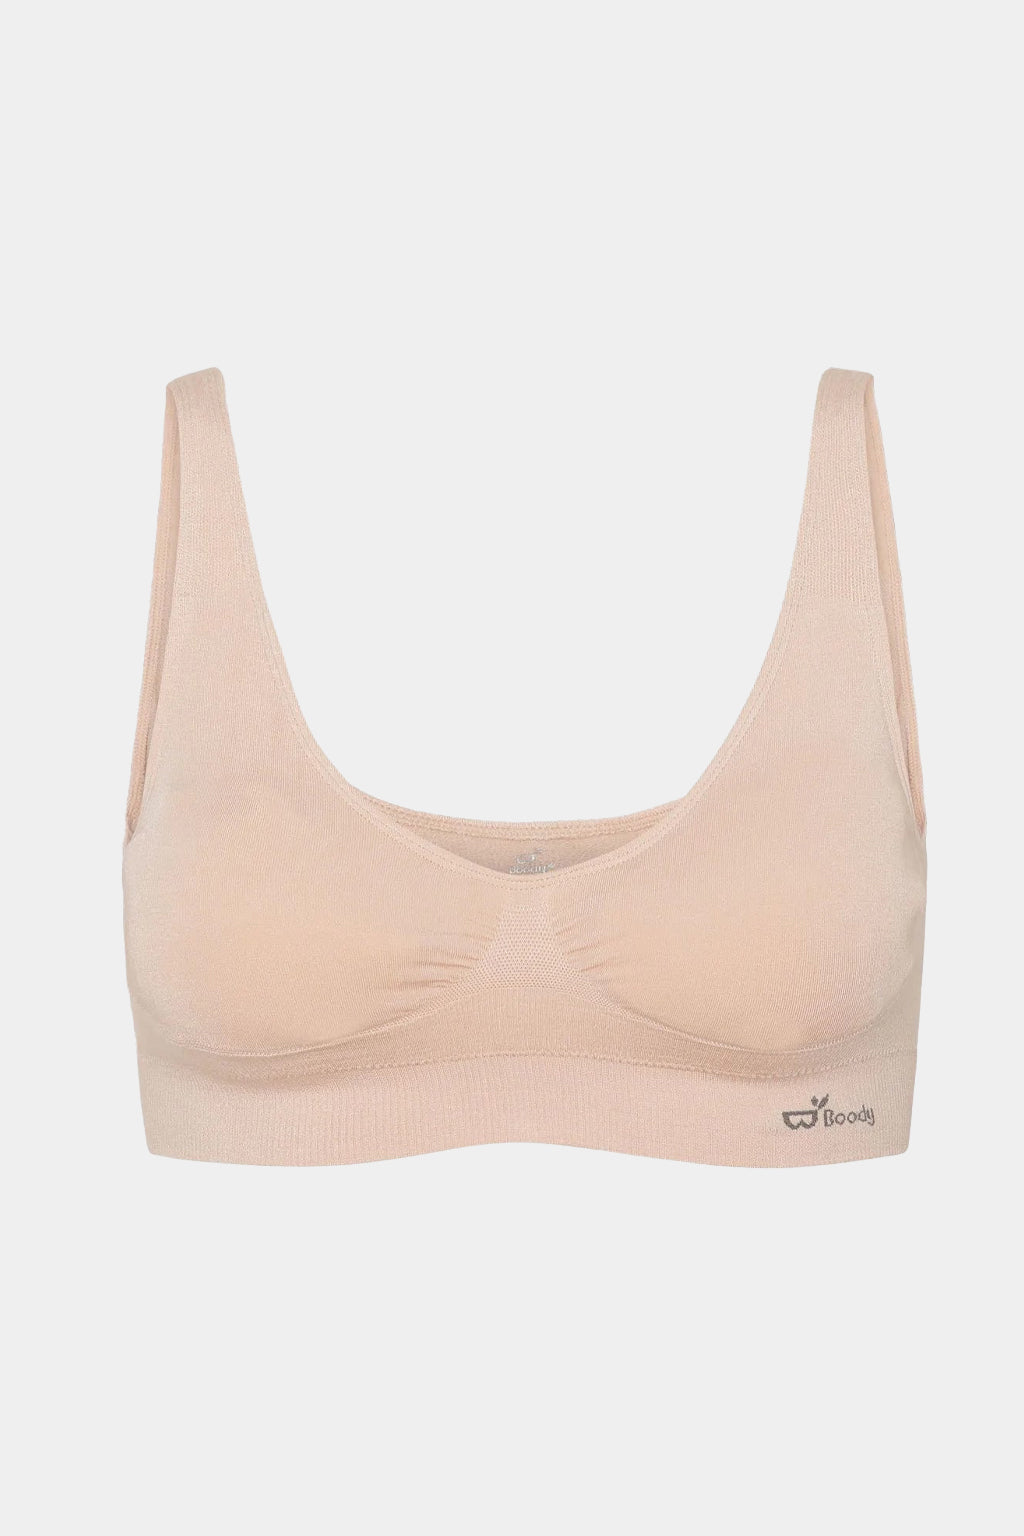 Boody Ecowear for Women's Padded Shaper Bra - Removable Padding